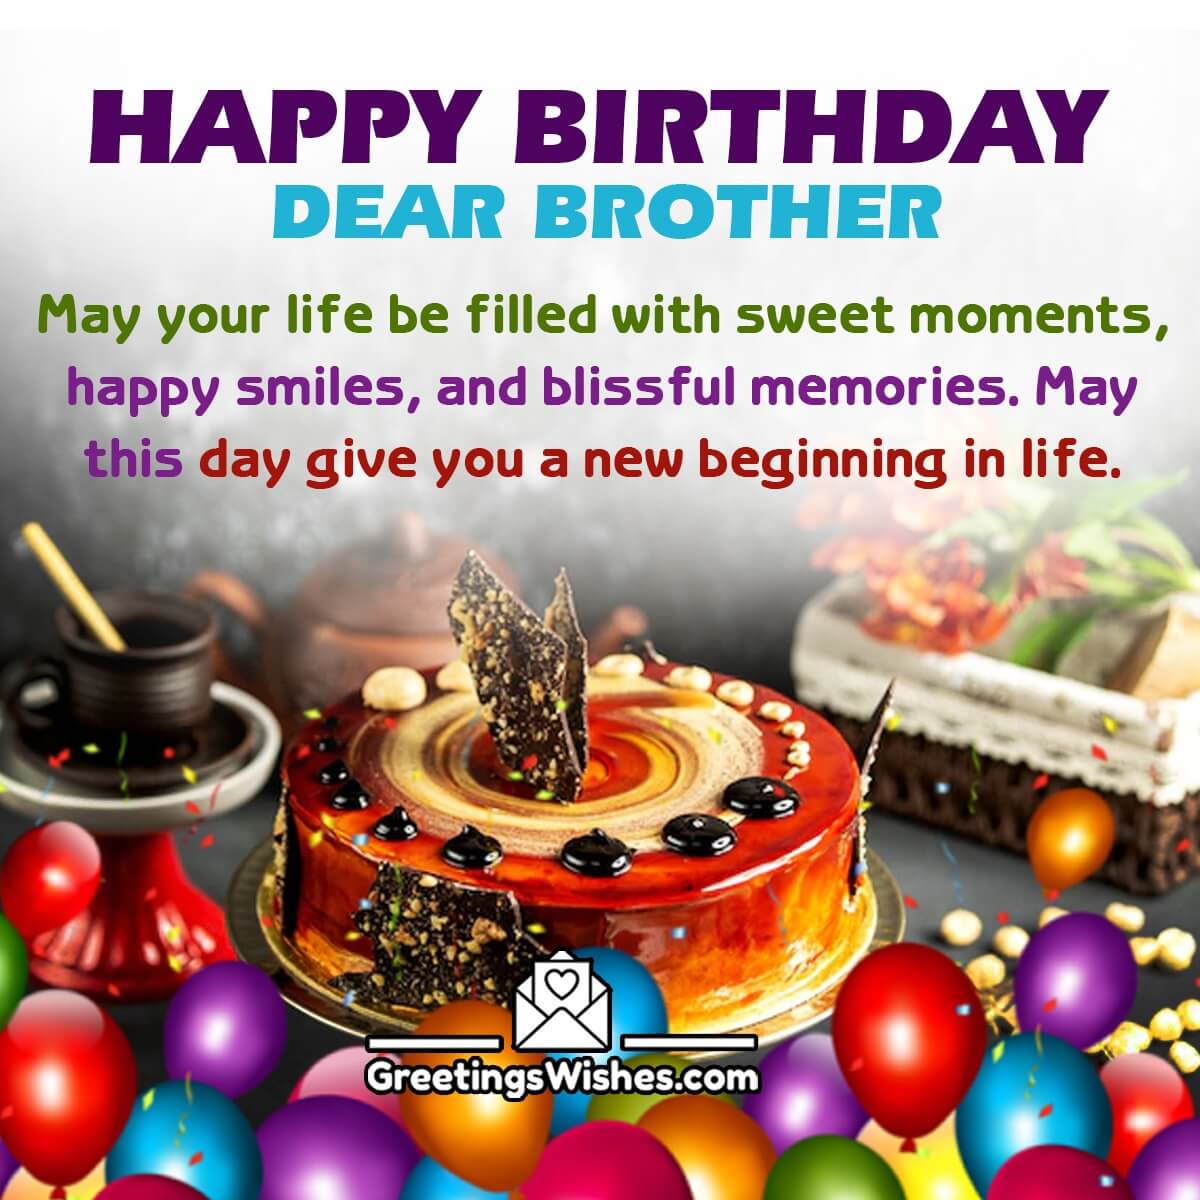 Happy Birthday Greetings For Brother